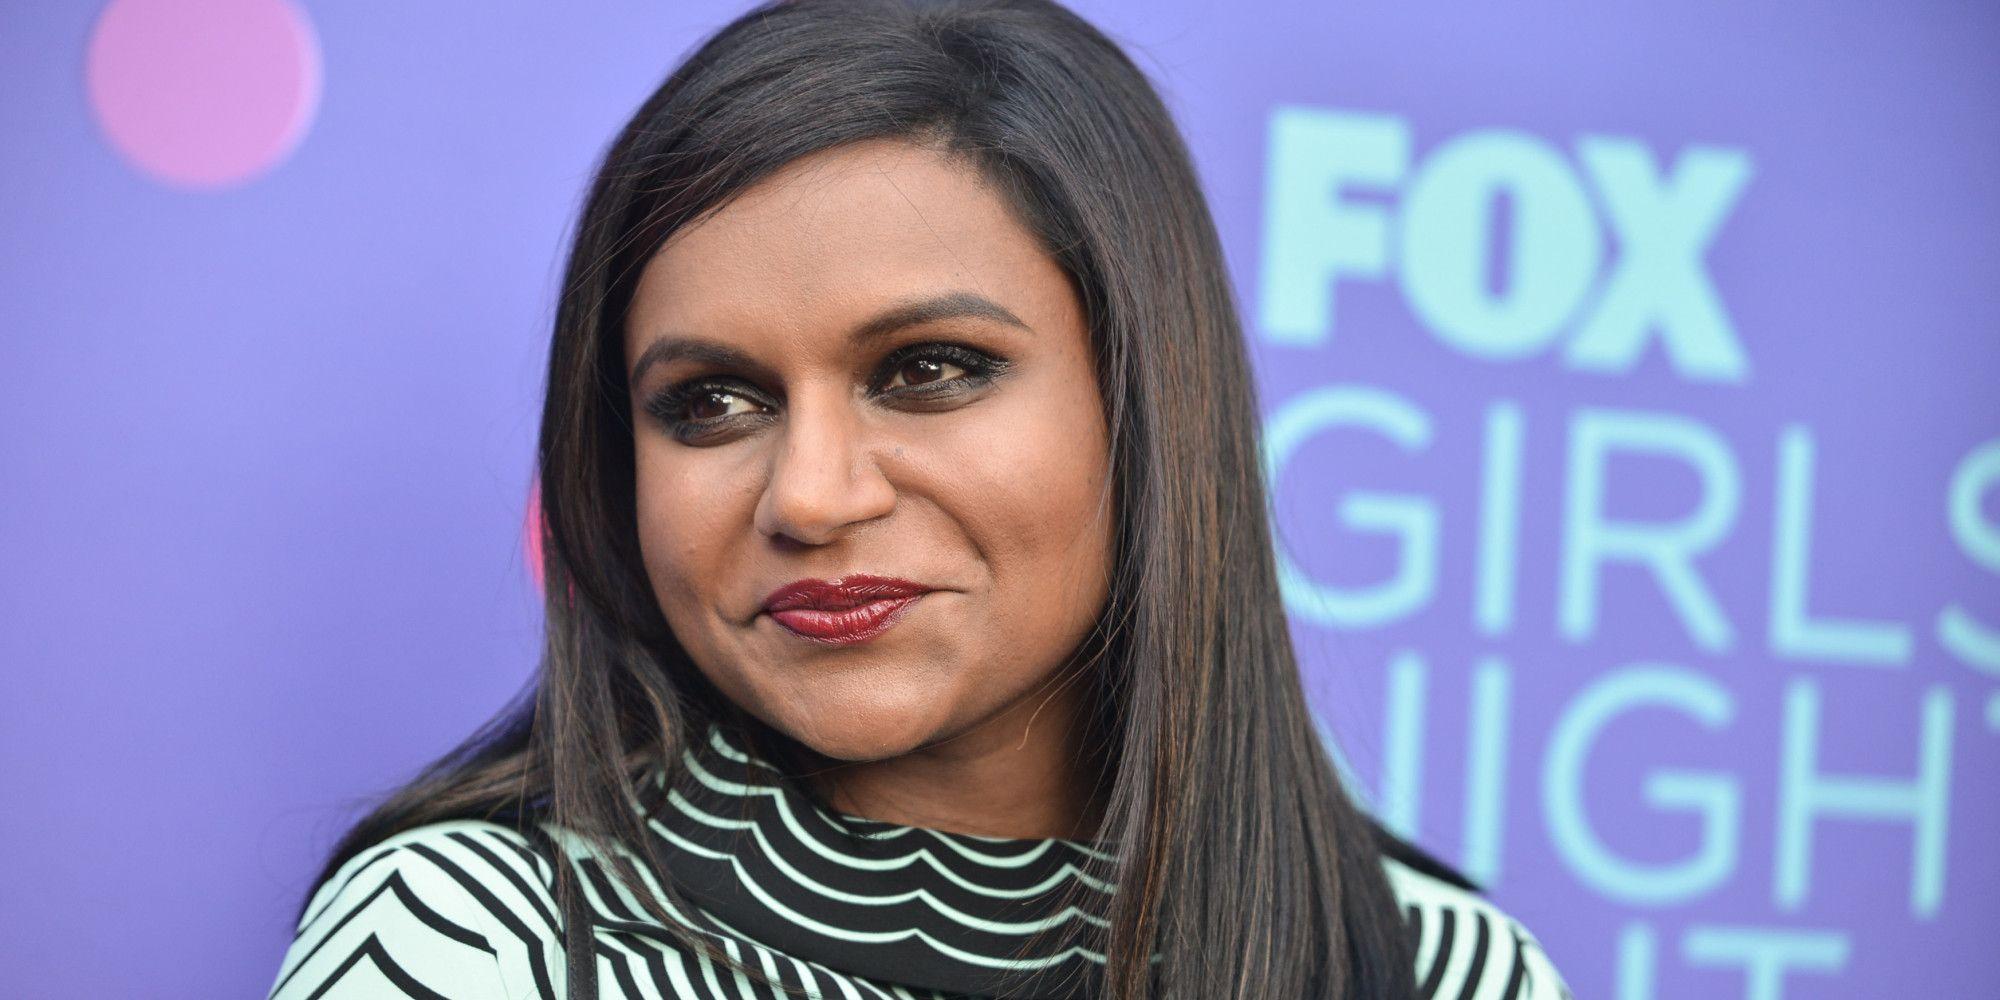 Mindy Kaling's Book for Why Not Me Features One of Her